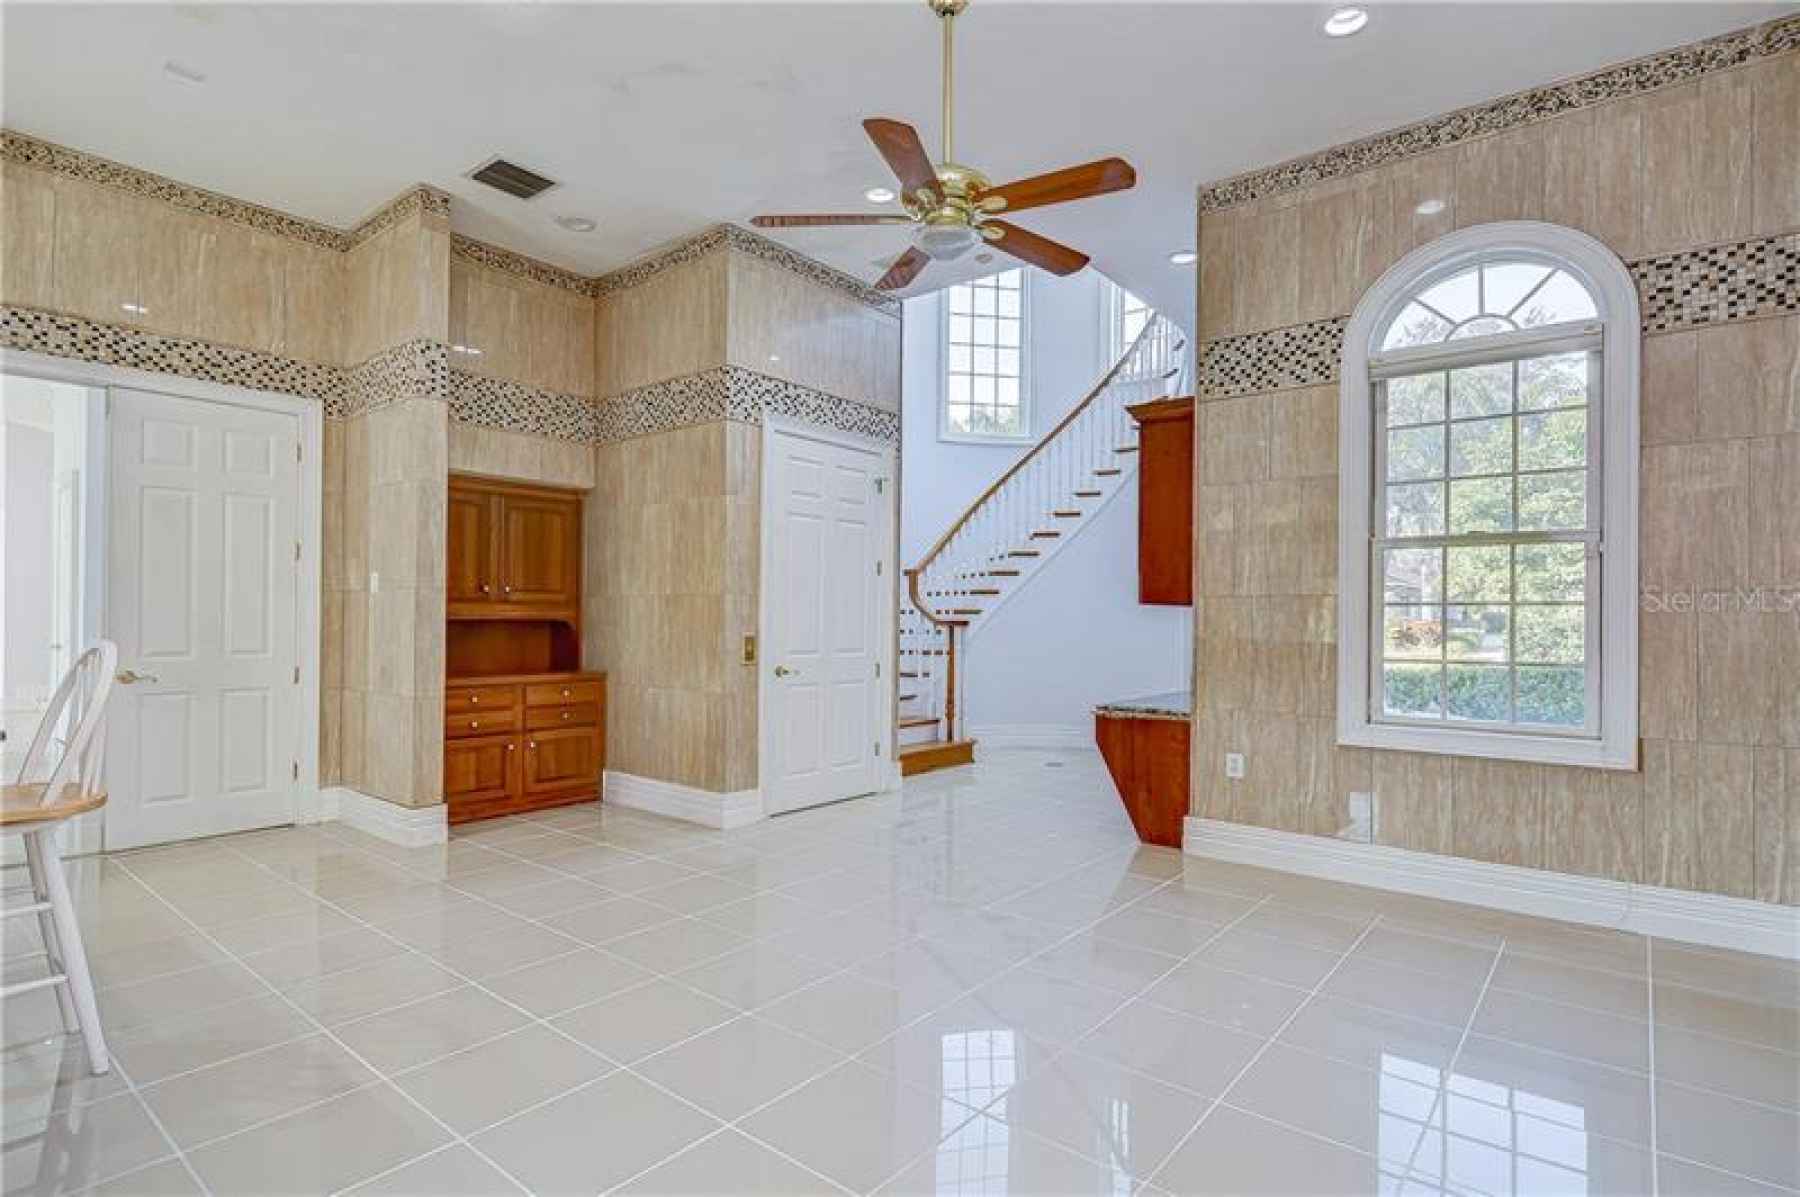 The tiling on this floor makes it easy to clean!